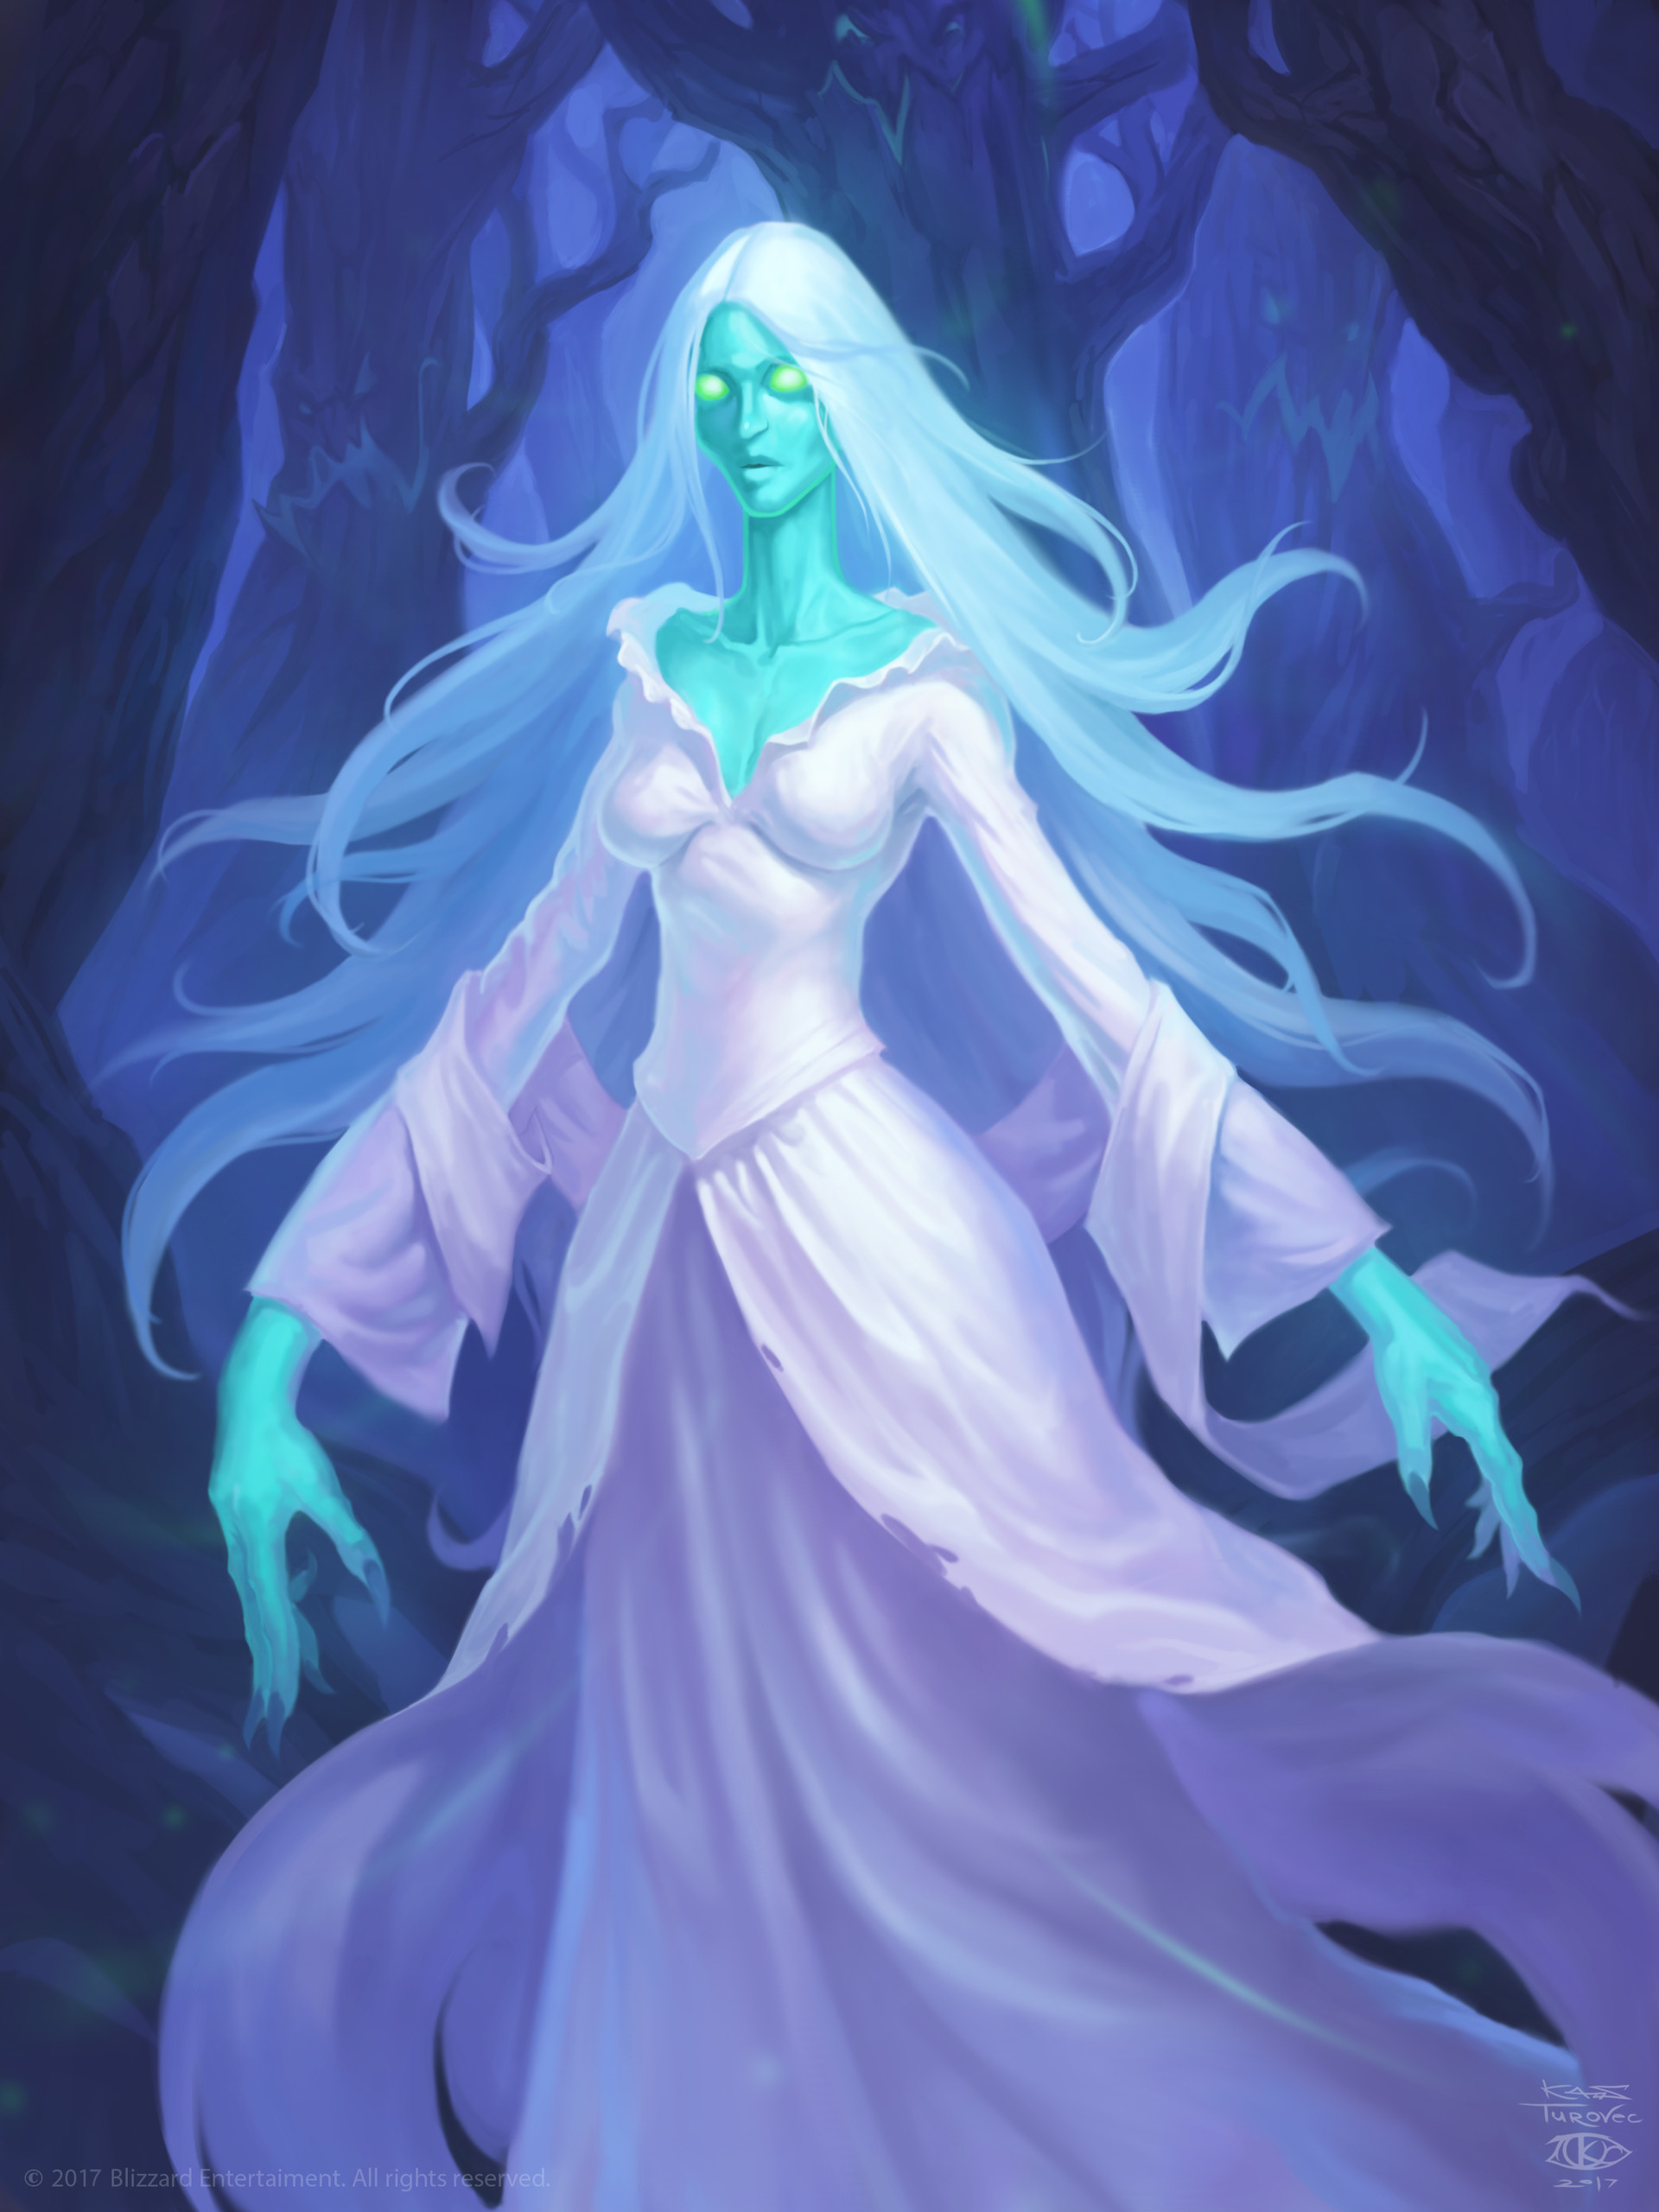 Lady in White - Hearthstone Card